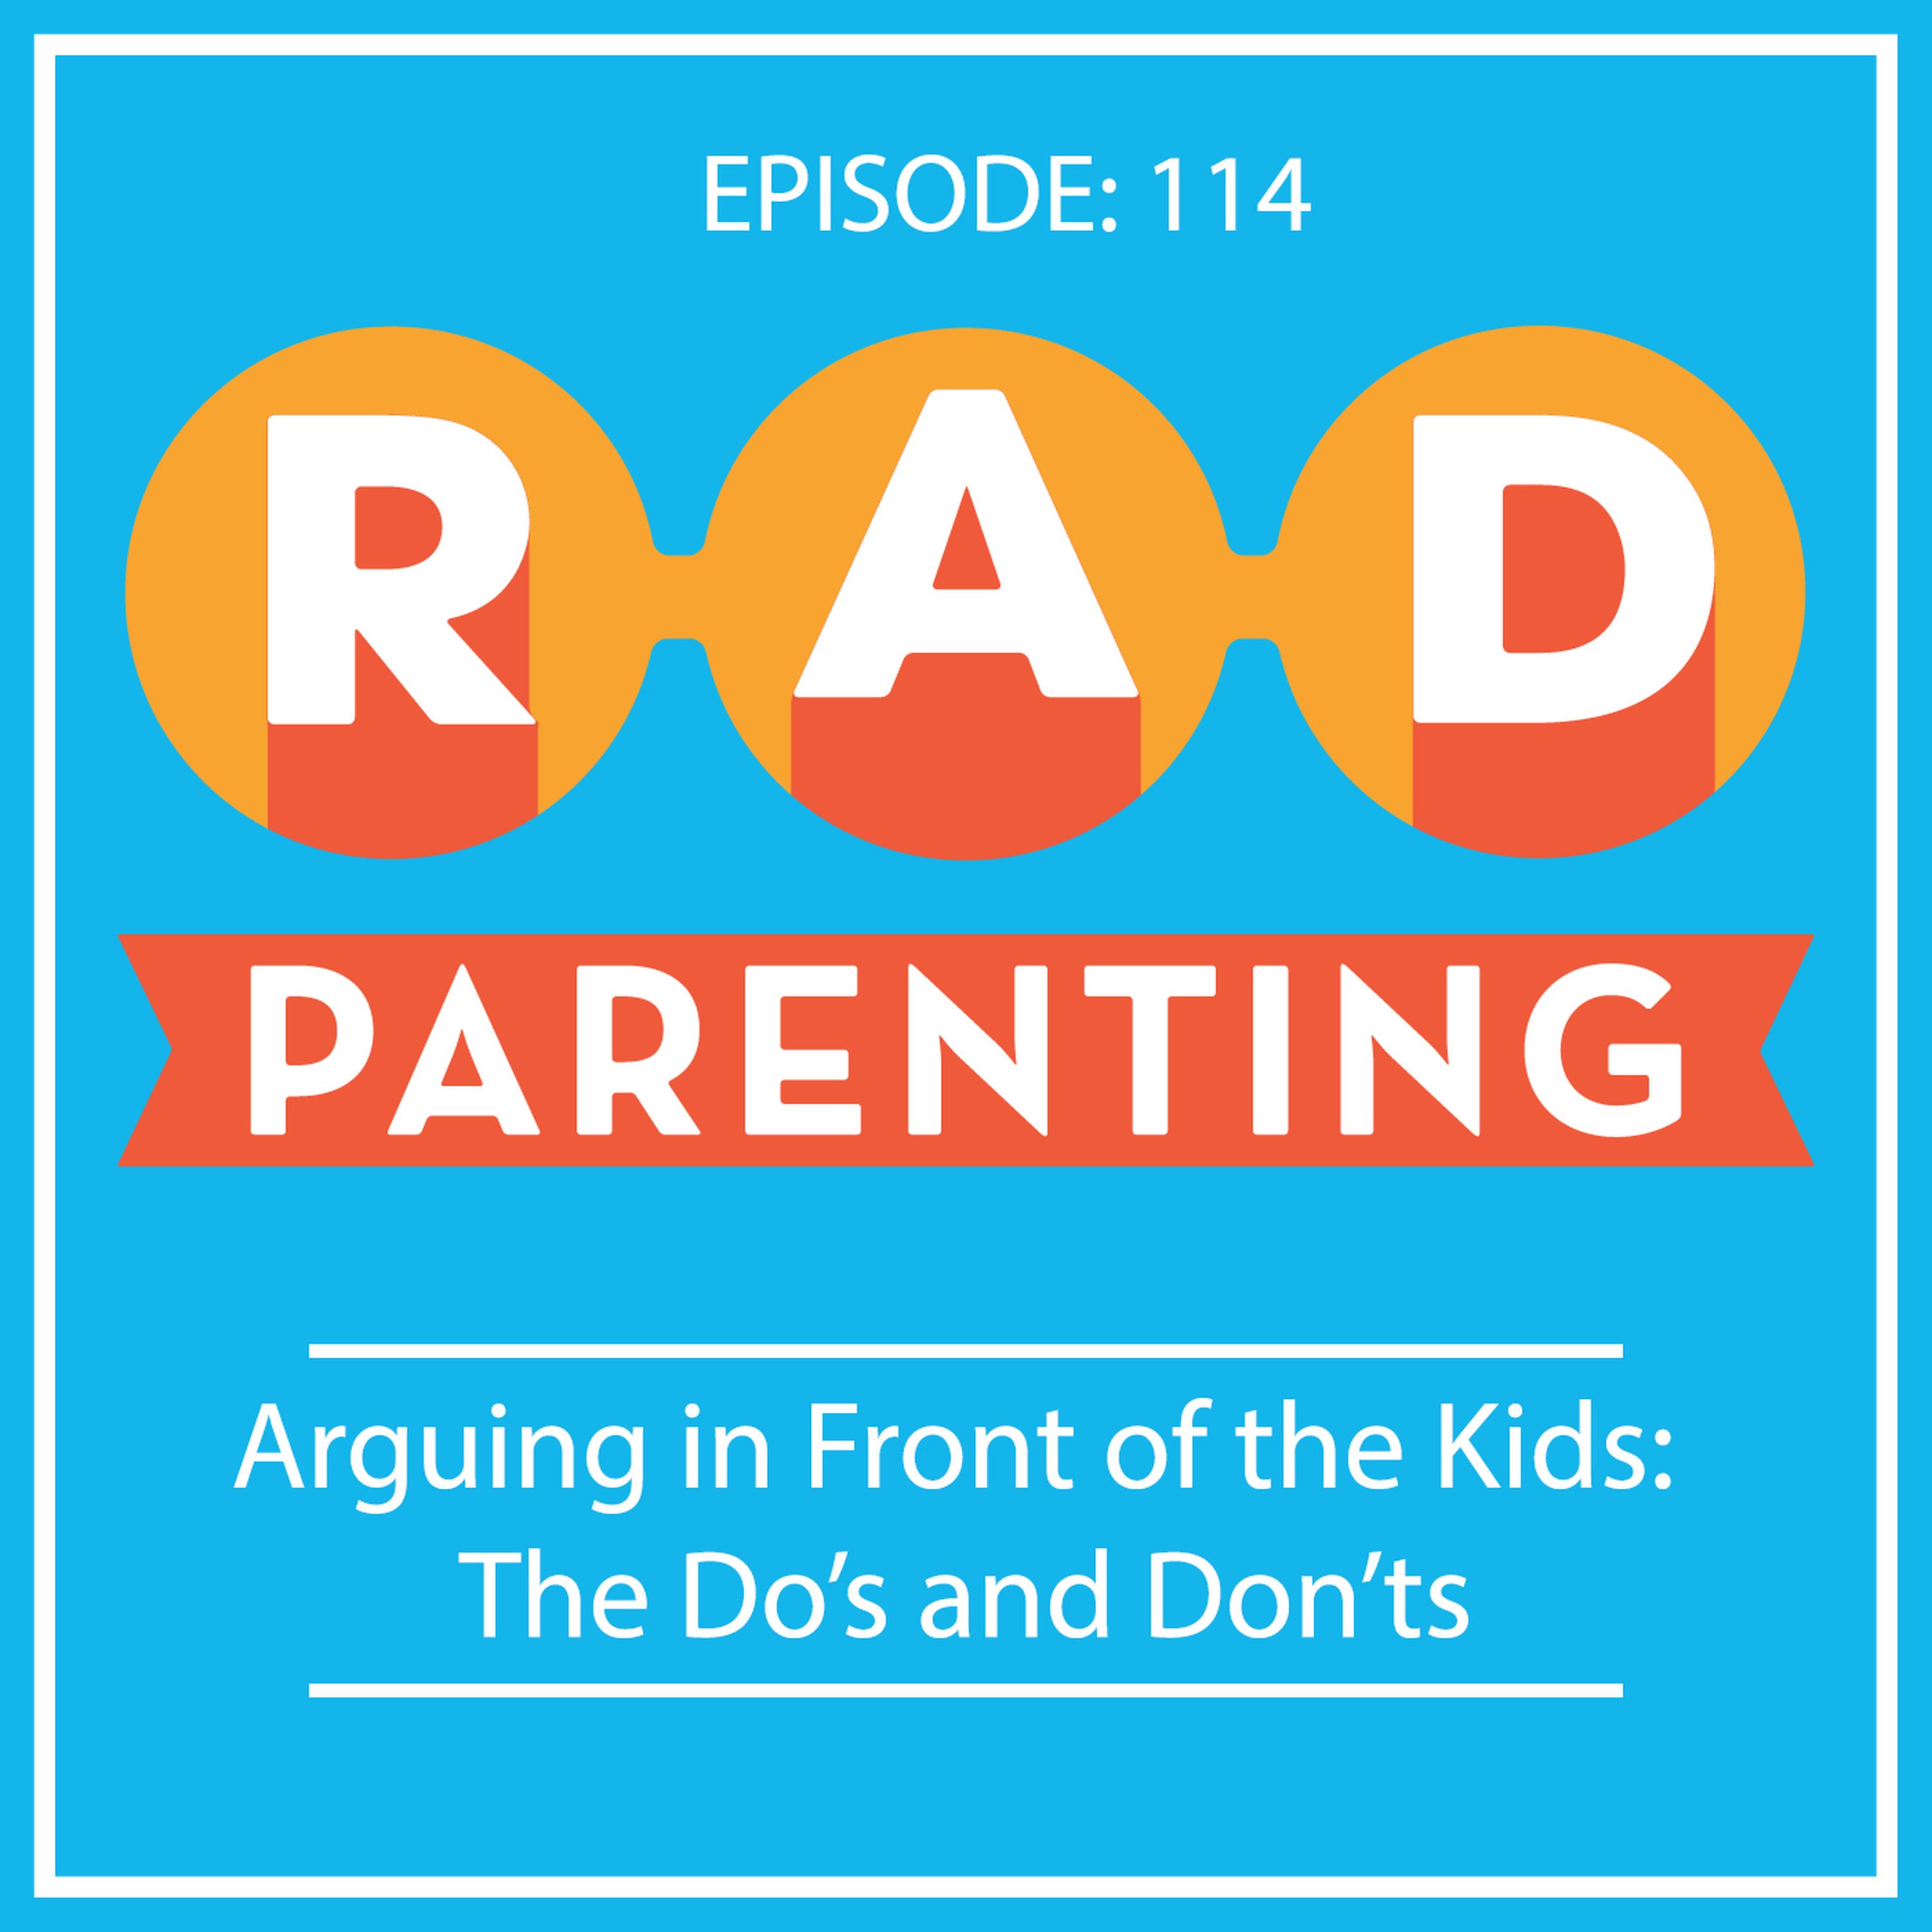 Arguing in Front of the Kids: The Do's and Dont's